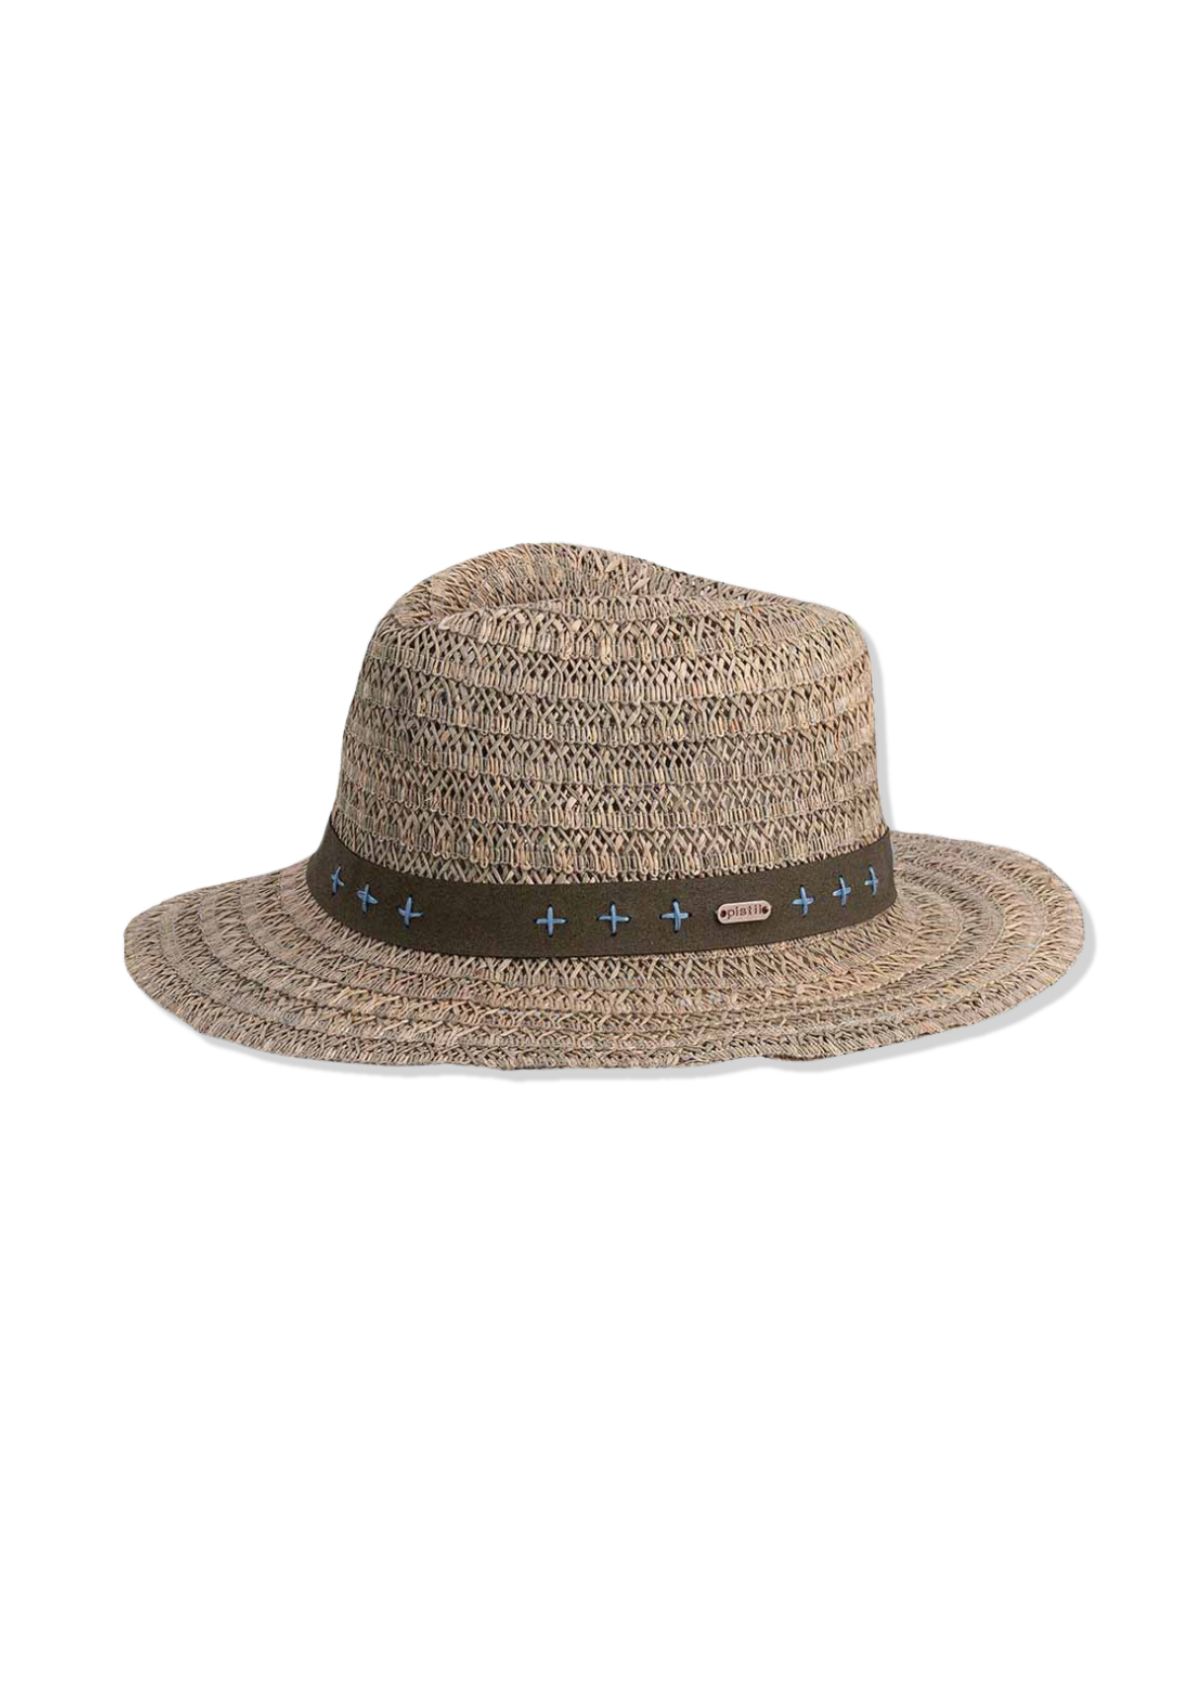 Dune Sunhat Airy Open Weave Seagrass Full Brim - Olive -Pistil /Fox River/ FTP Designs / Isotoner / Totes- Ruby Jane-